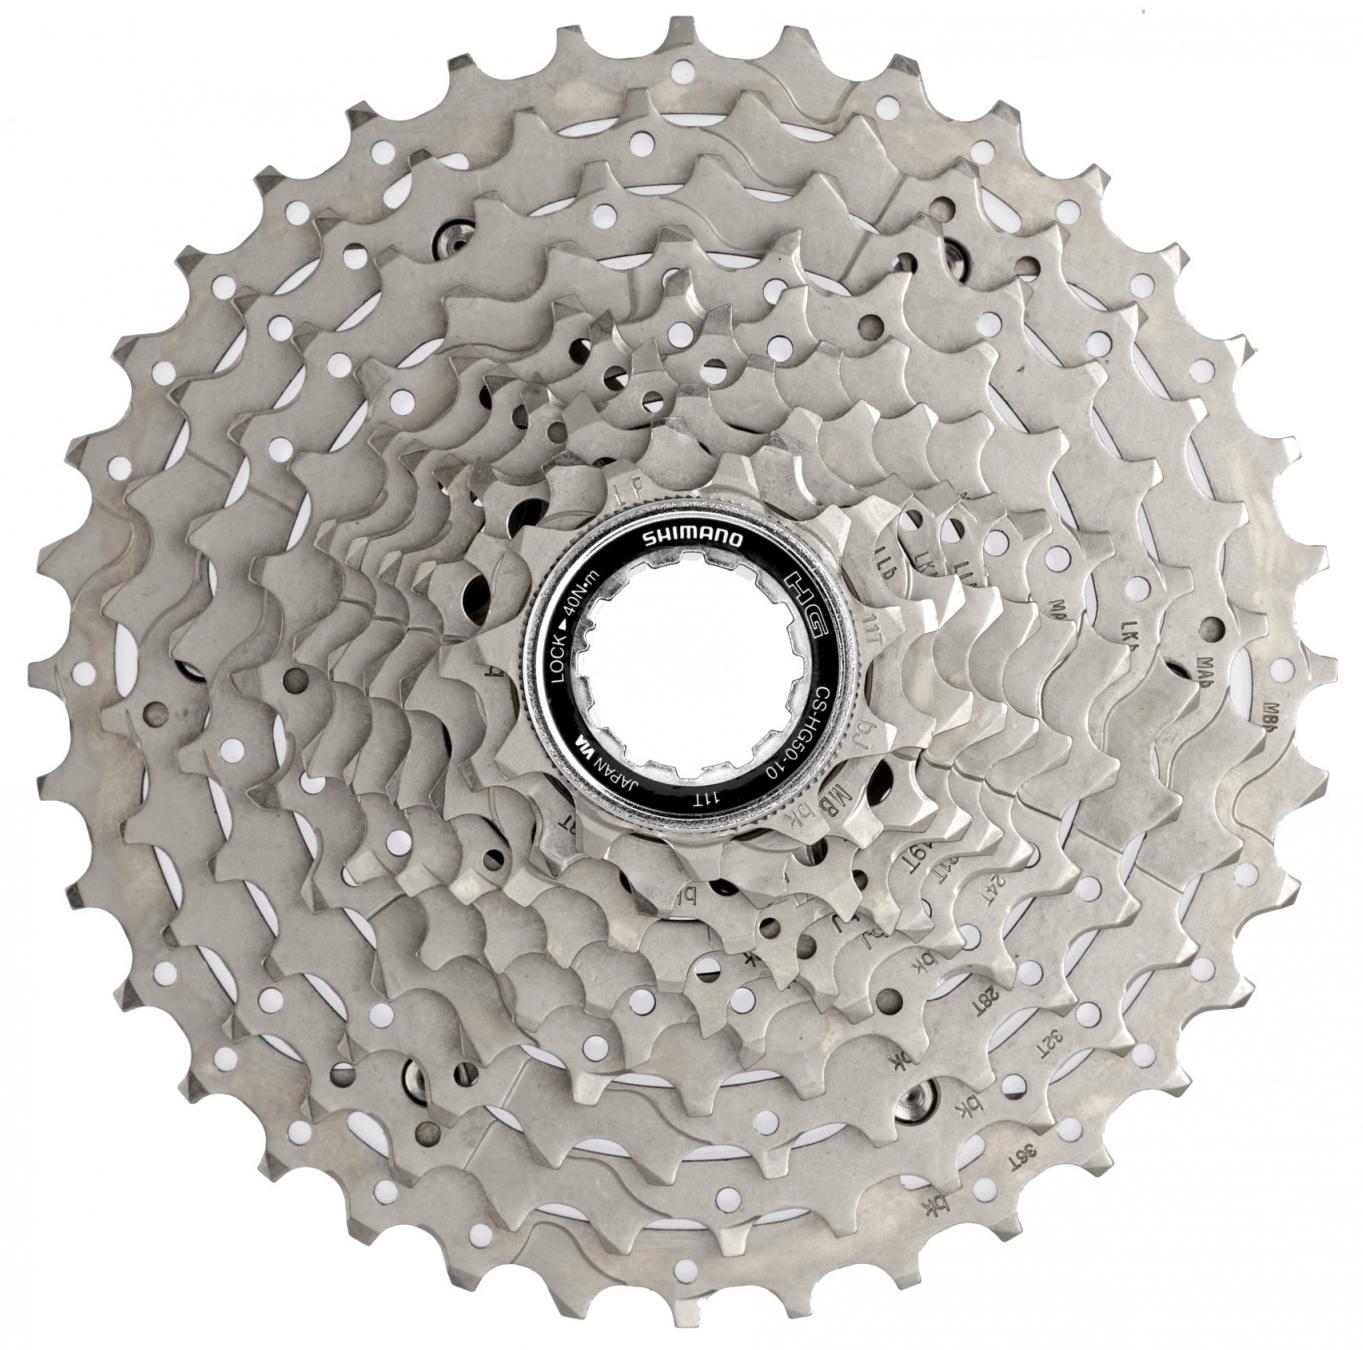 Shimano Deore Hg50 10 Speed Mtb Cassette  Silver